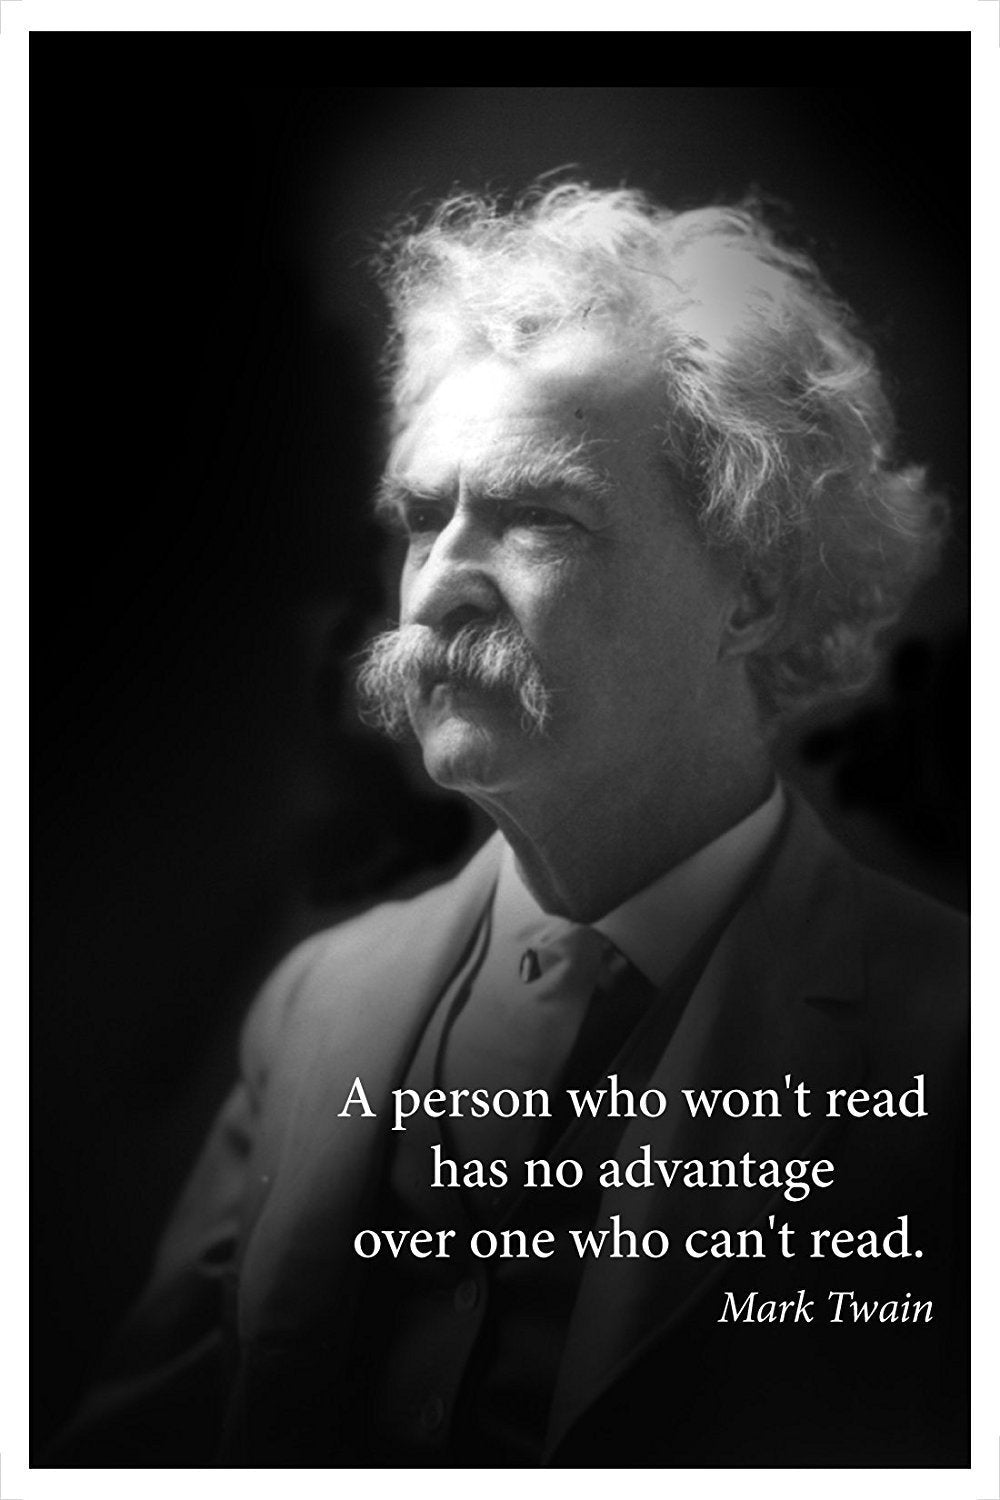 A Person Who Won't Read Quote By Mark Twain Portrait Poster - Young N' Refined